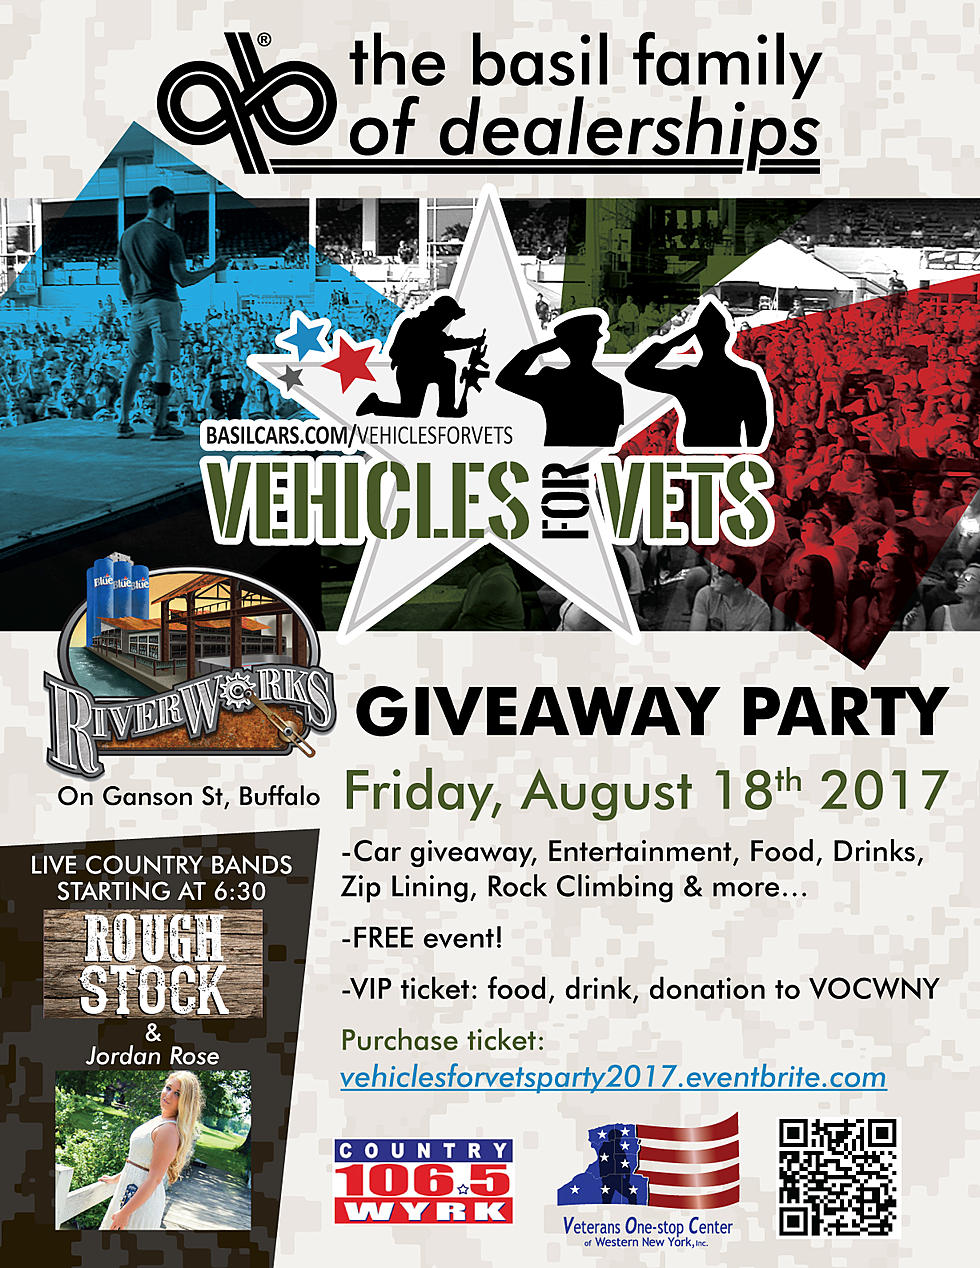 Basil’s Vehicles for Vets Giveaway Party